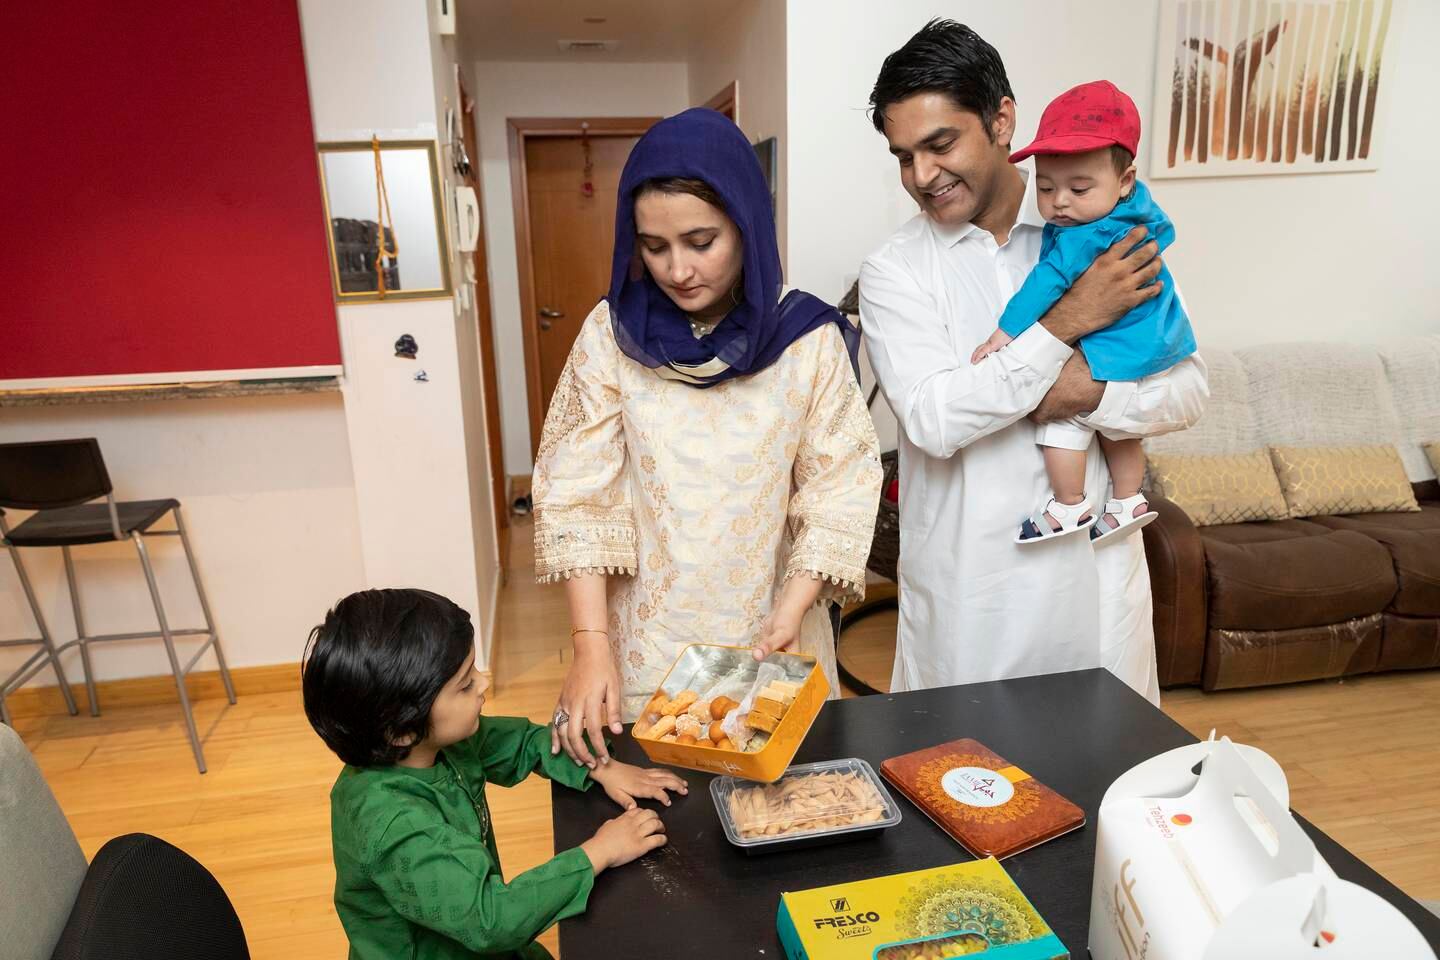 Dr Javairia Hassan, her husband Hassan Ashraf and their two sons are going on a staycation in Ras Al Khaimah for Eid Al Fitr. Antonie Robertson / The National
